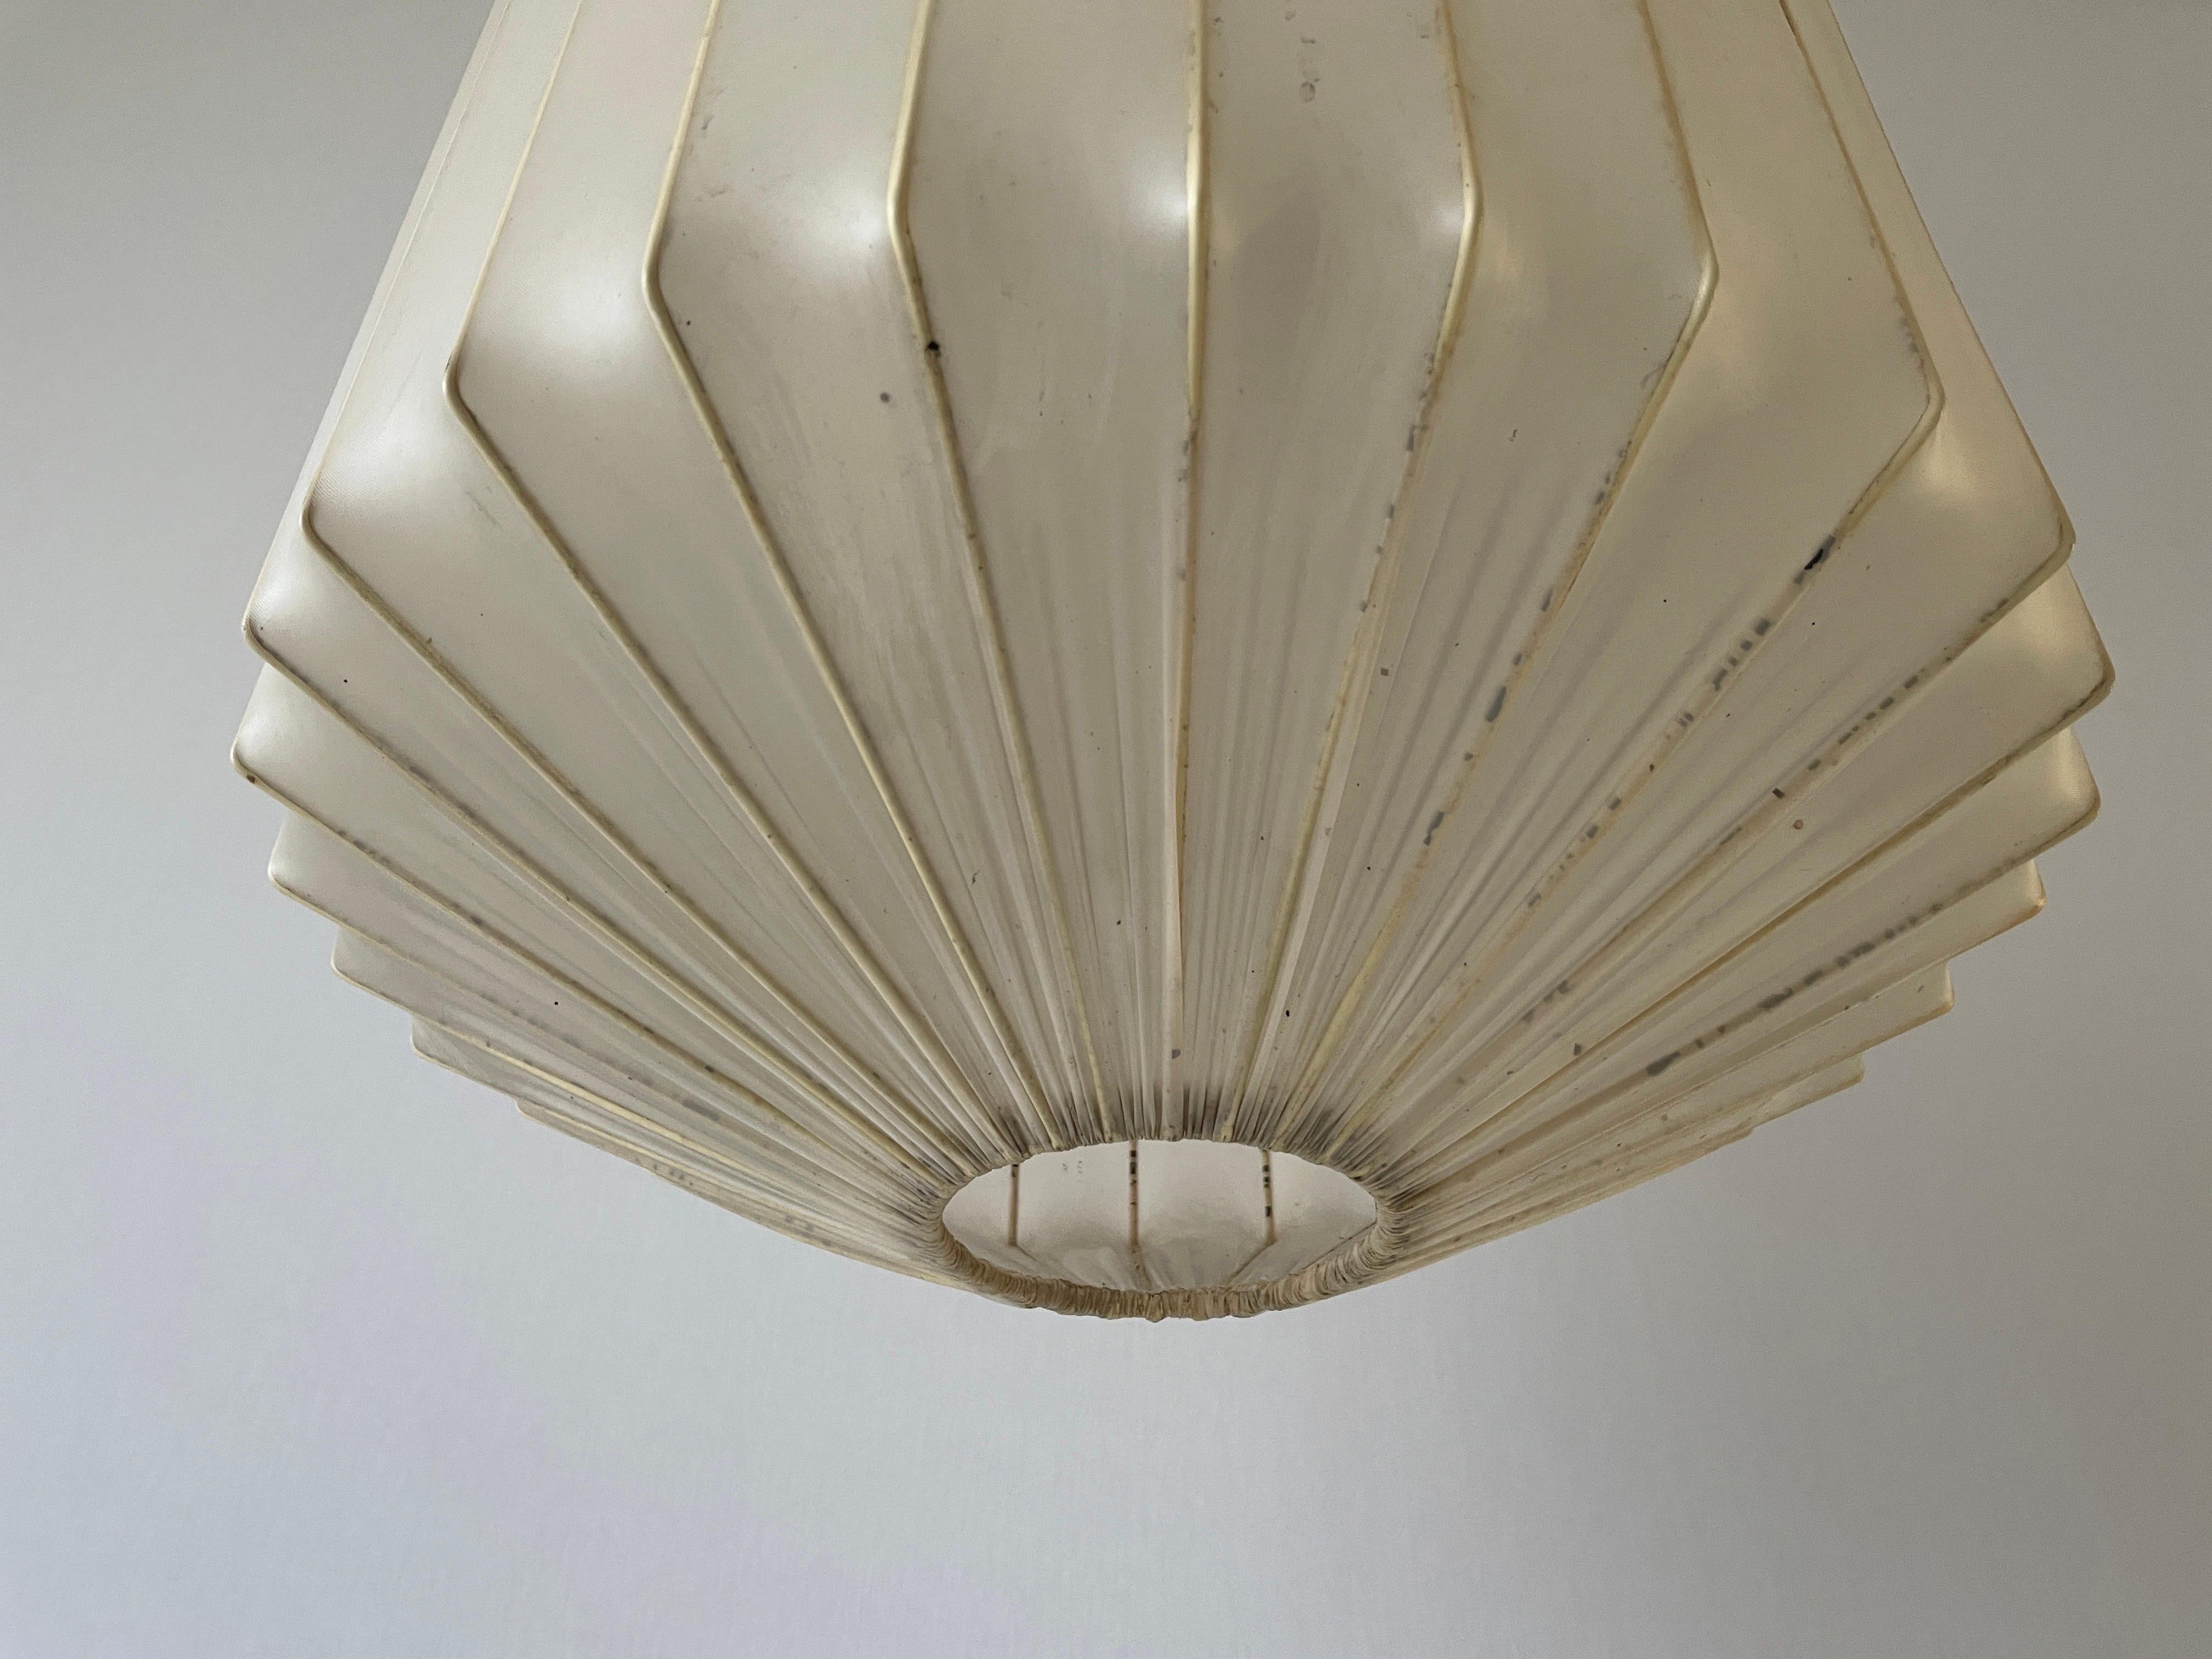 Satin Silk Fabric Ceiling Lamp in Cocoon Shape, 1960s, Italy For Sale 1